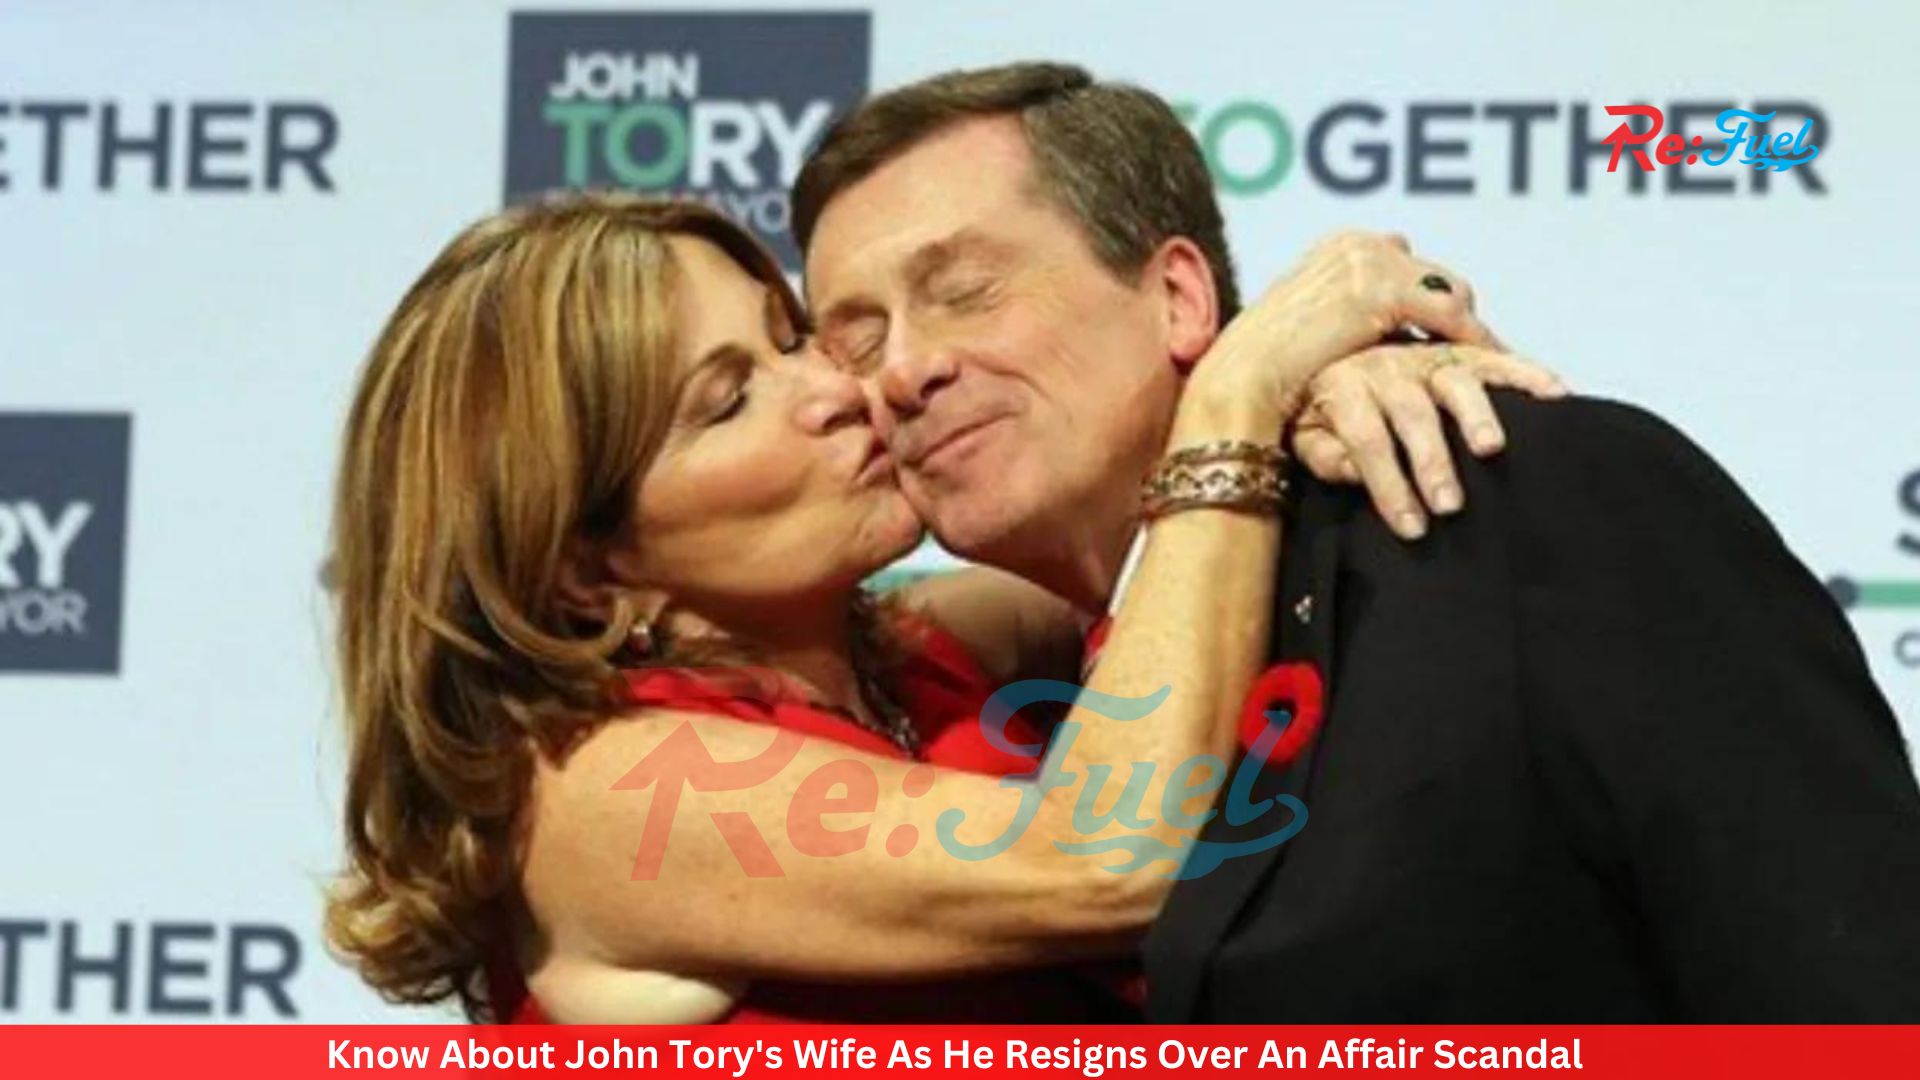 Know About John Tory's Wife As He Resigns Over An Affair Scandal